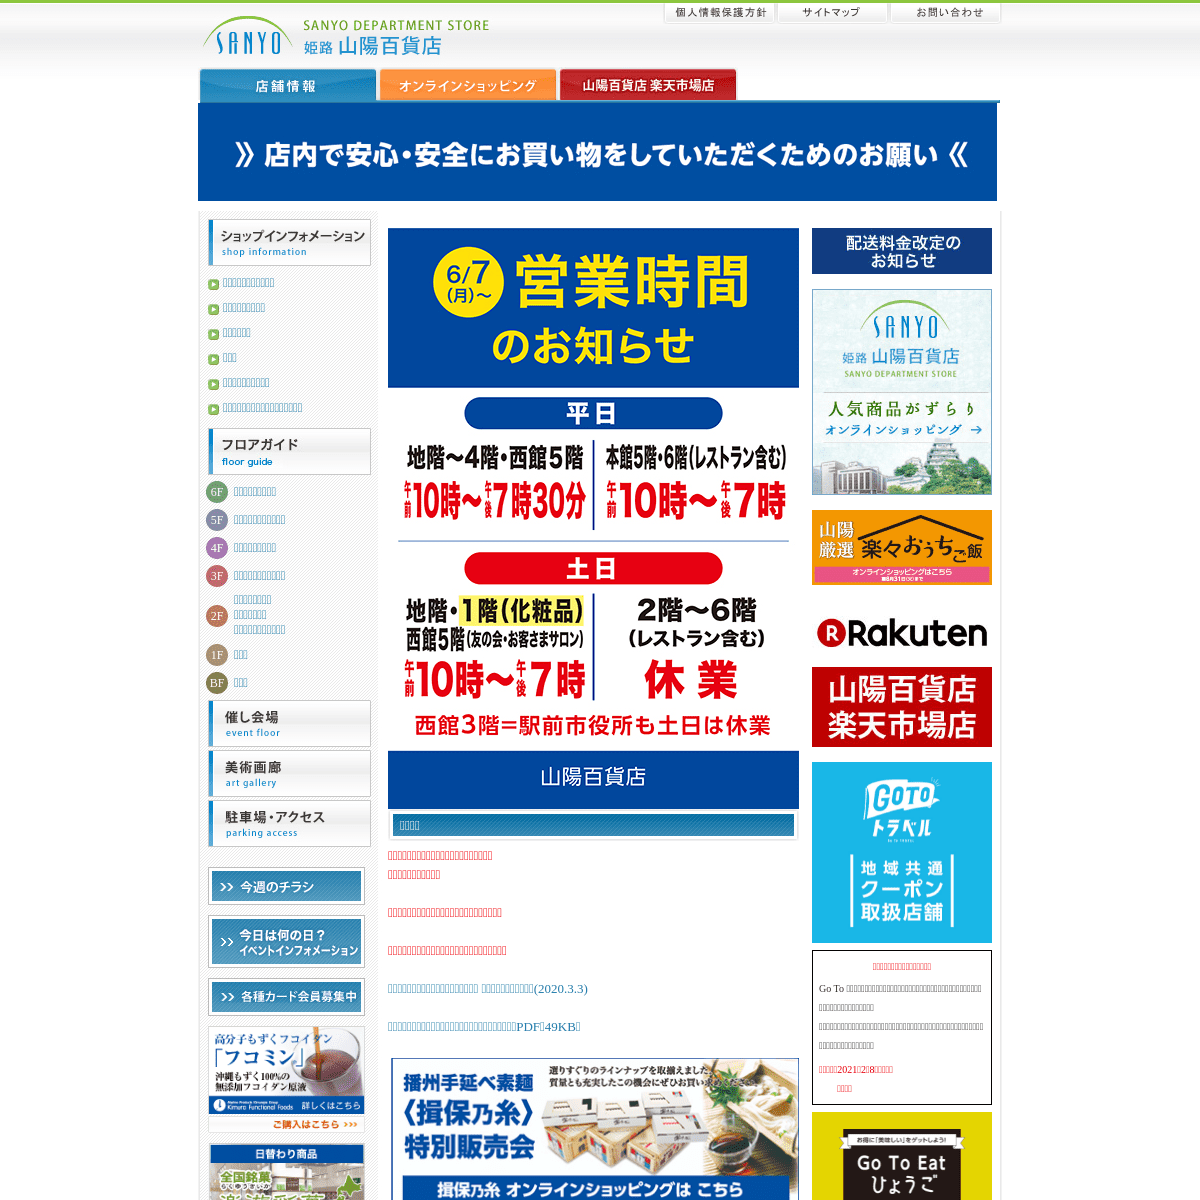 A complete backup of https://sanyo-dp.co.jp